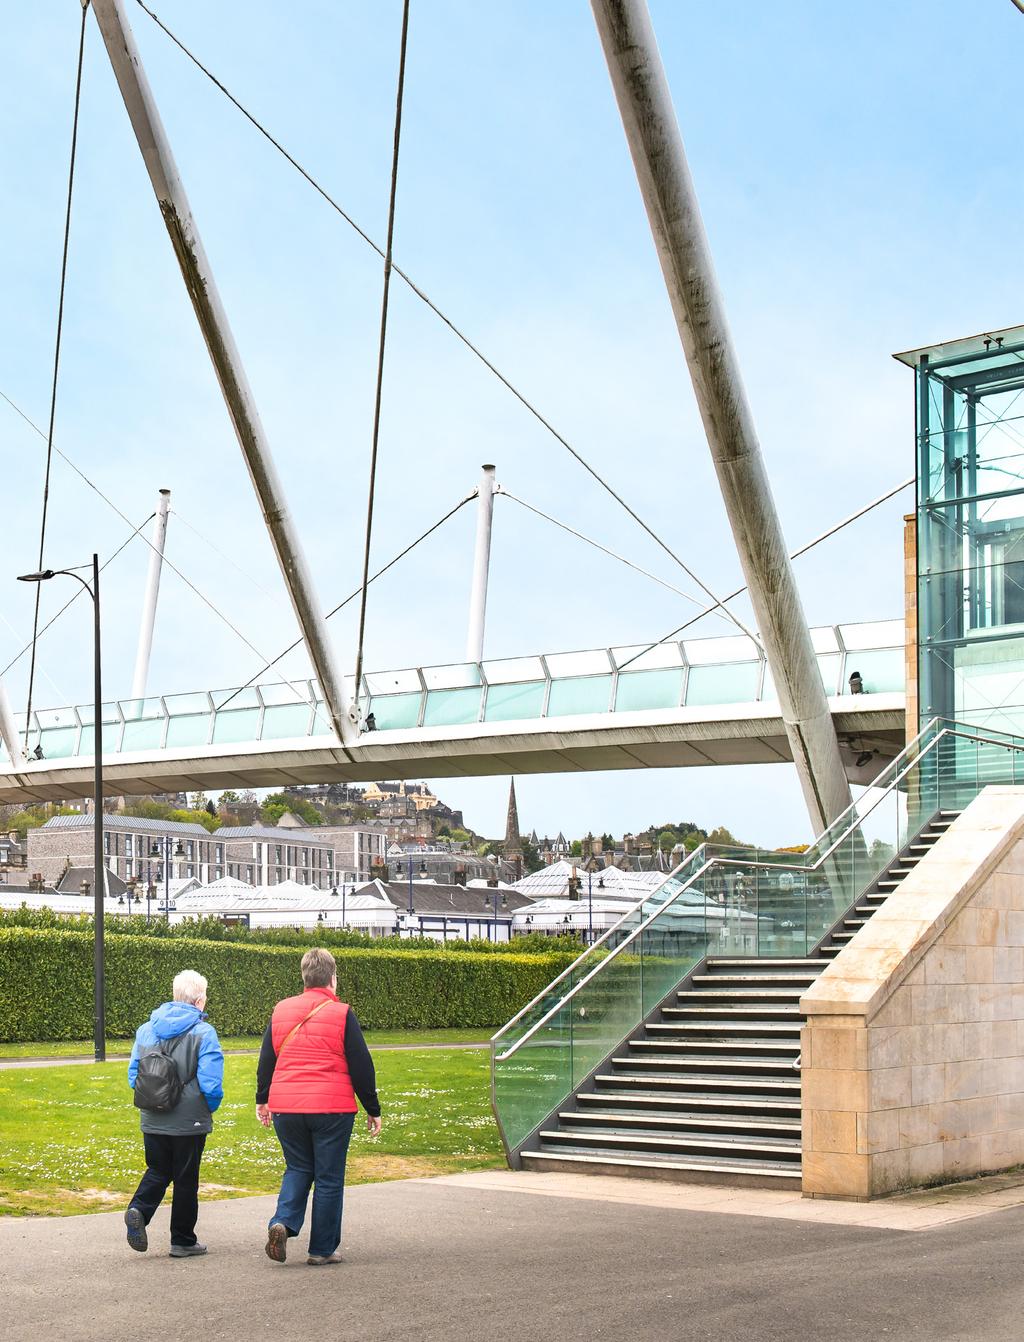 FORTHSIDE QUARTER Stirling is a regionally dominant city with a strong retail and leisure offer.